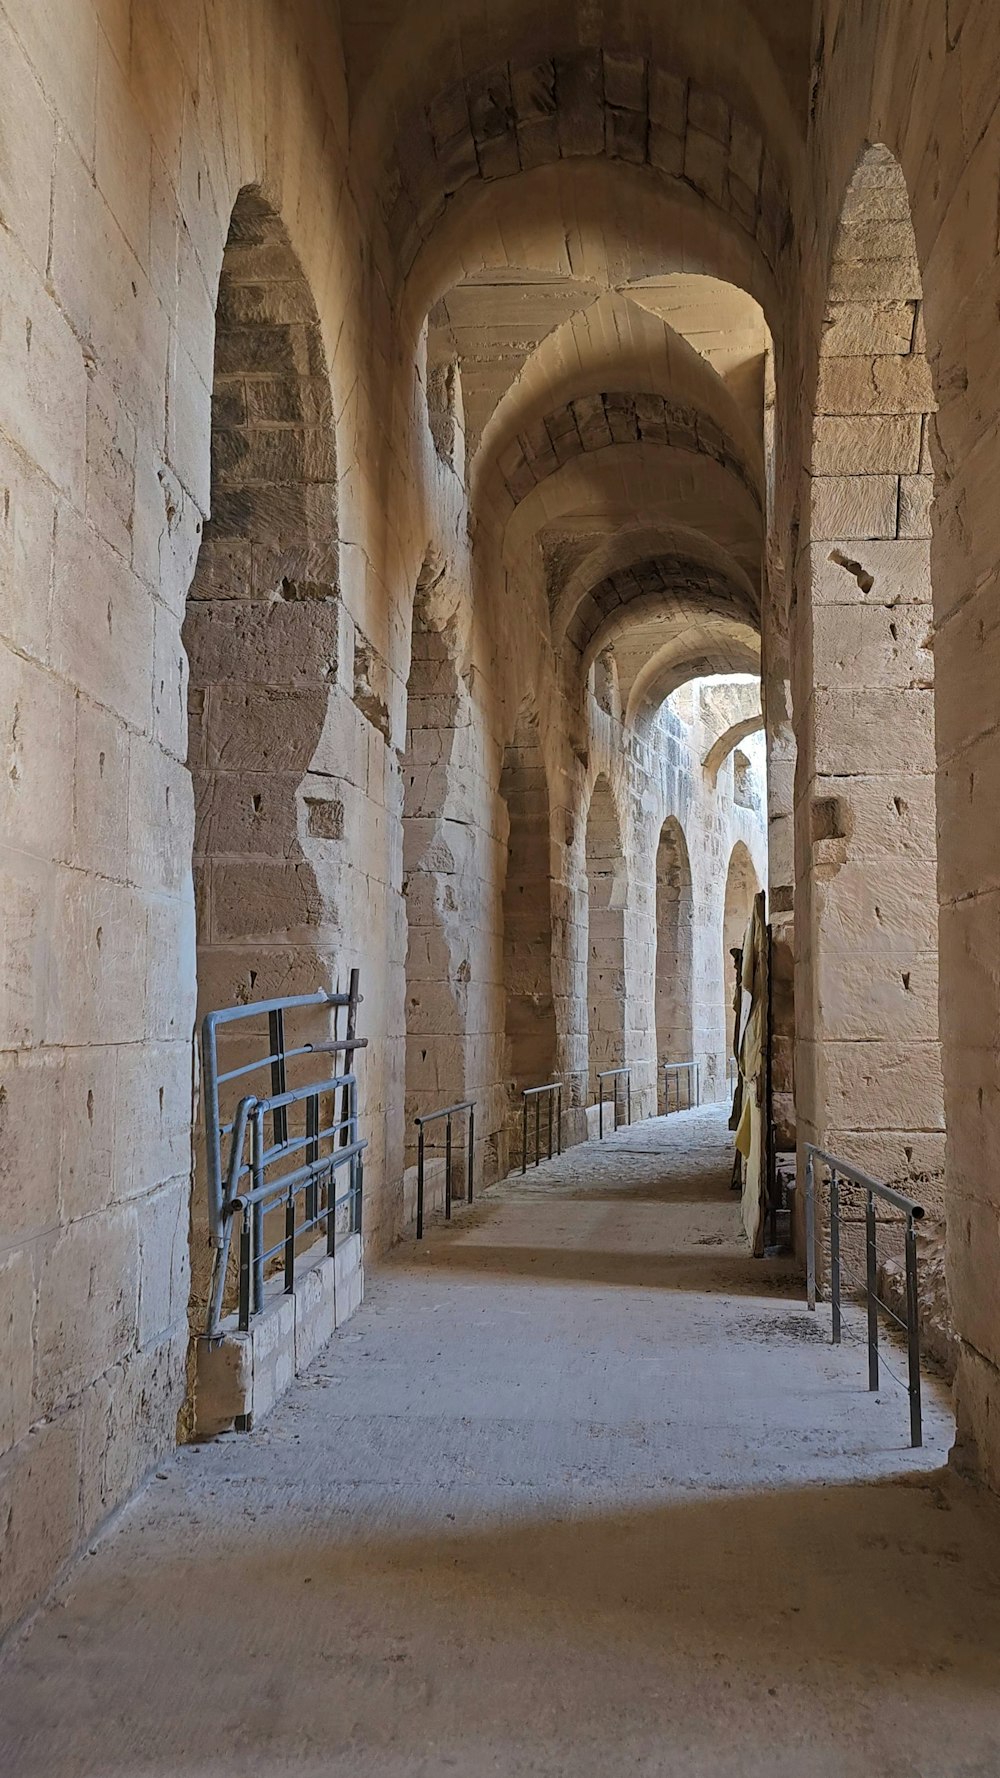 a long hallway with stone walls and arched doorways